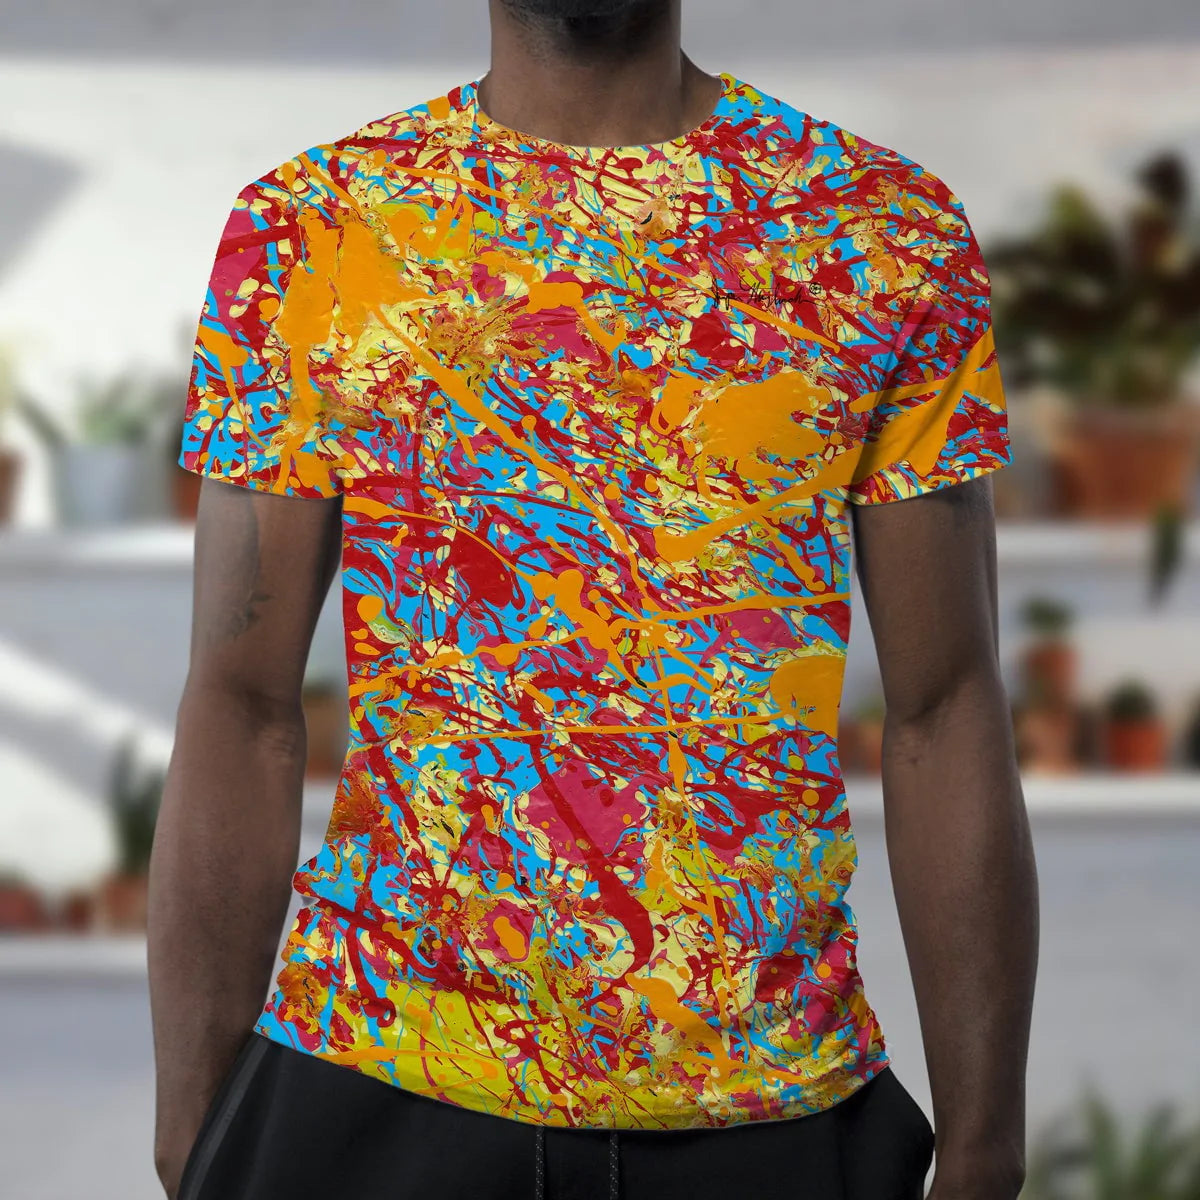 World Jumper, the T-Shirt by Jumper Maybach Inspired by Jumper Mayba